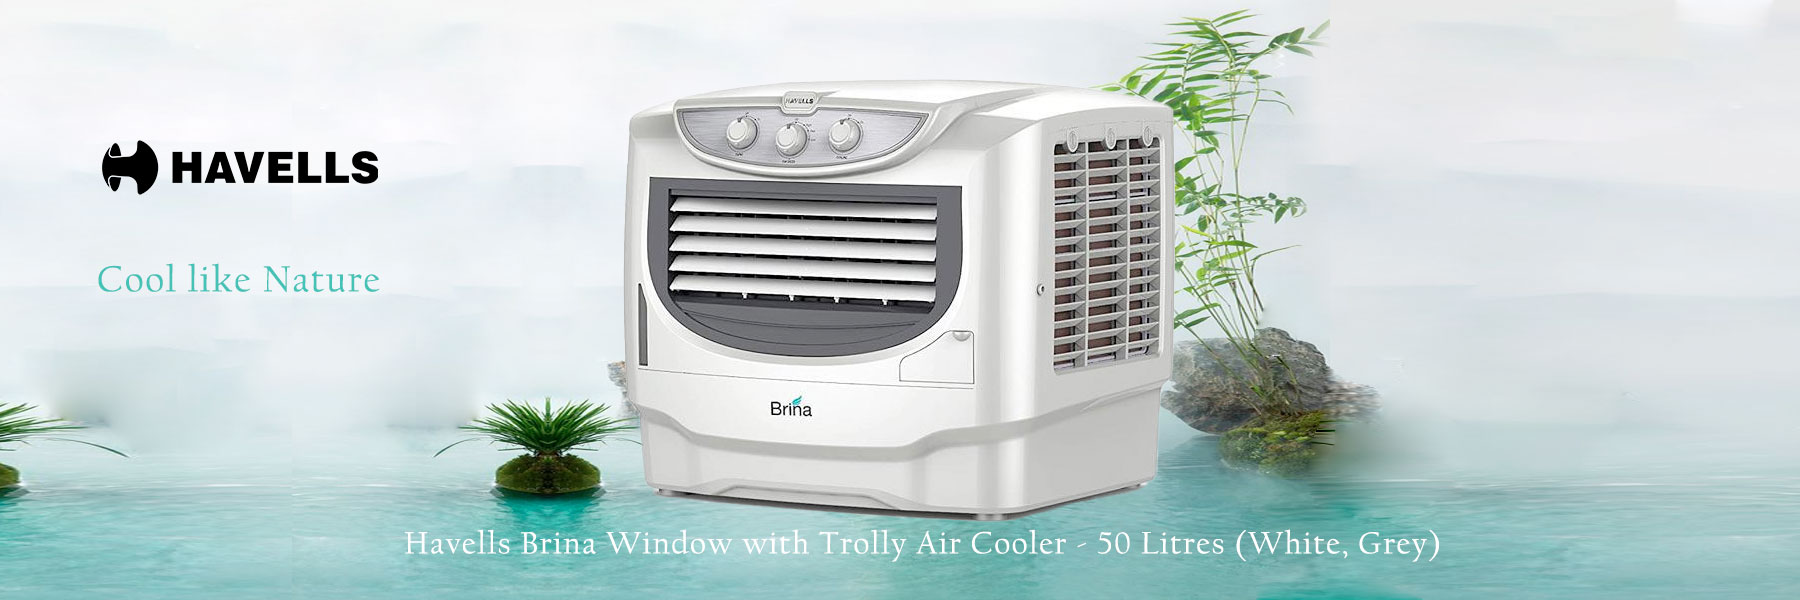 Havells Brina Window with Trolly Air Cooler - 50 Litres (White, Grey)